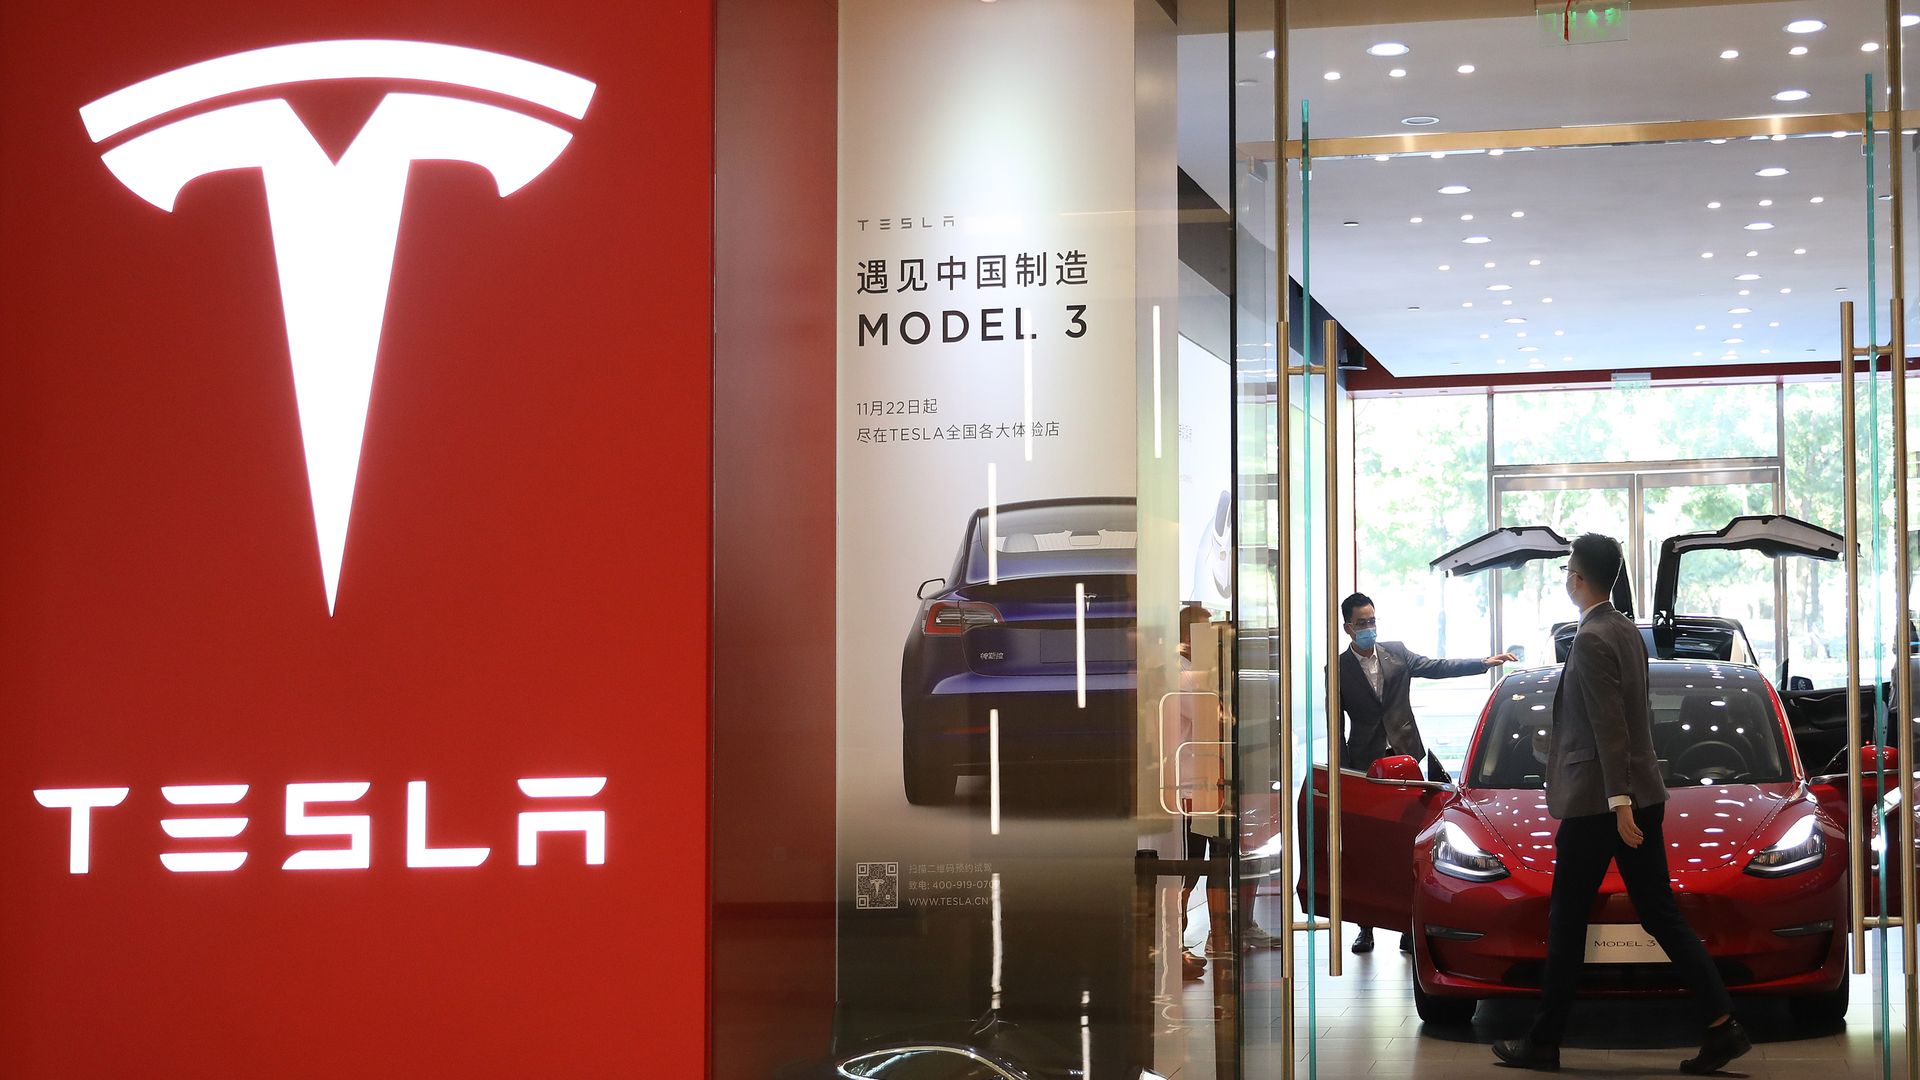 A Tesla 3 electric vehicle displayed in a showroom in Beijing, China